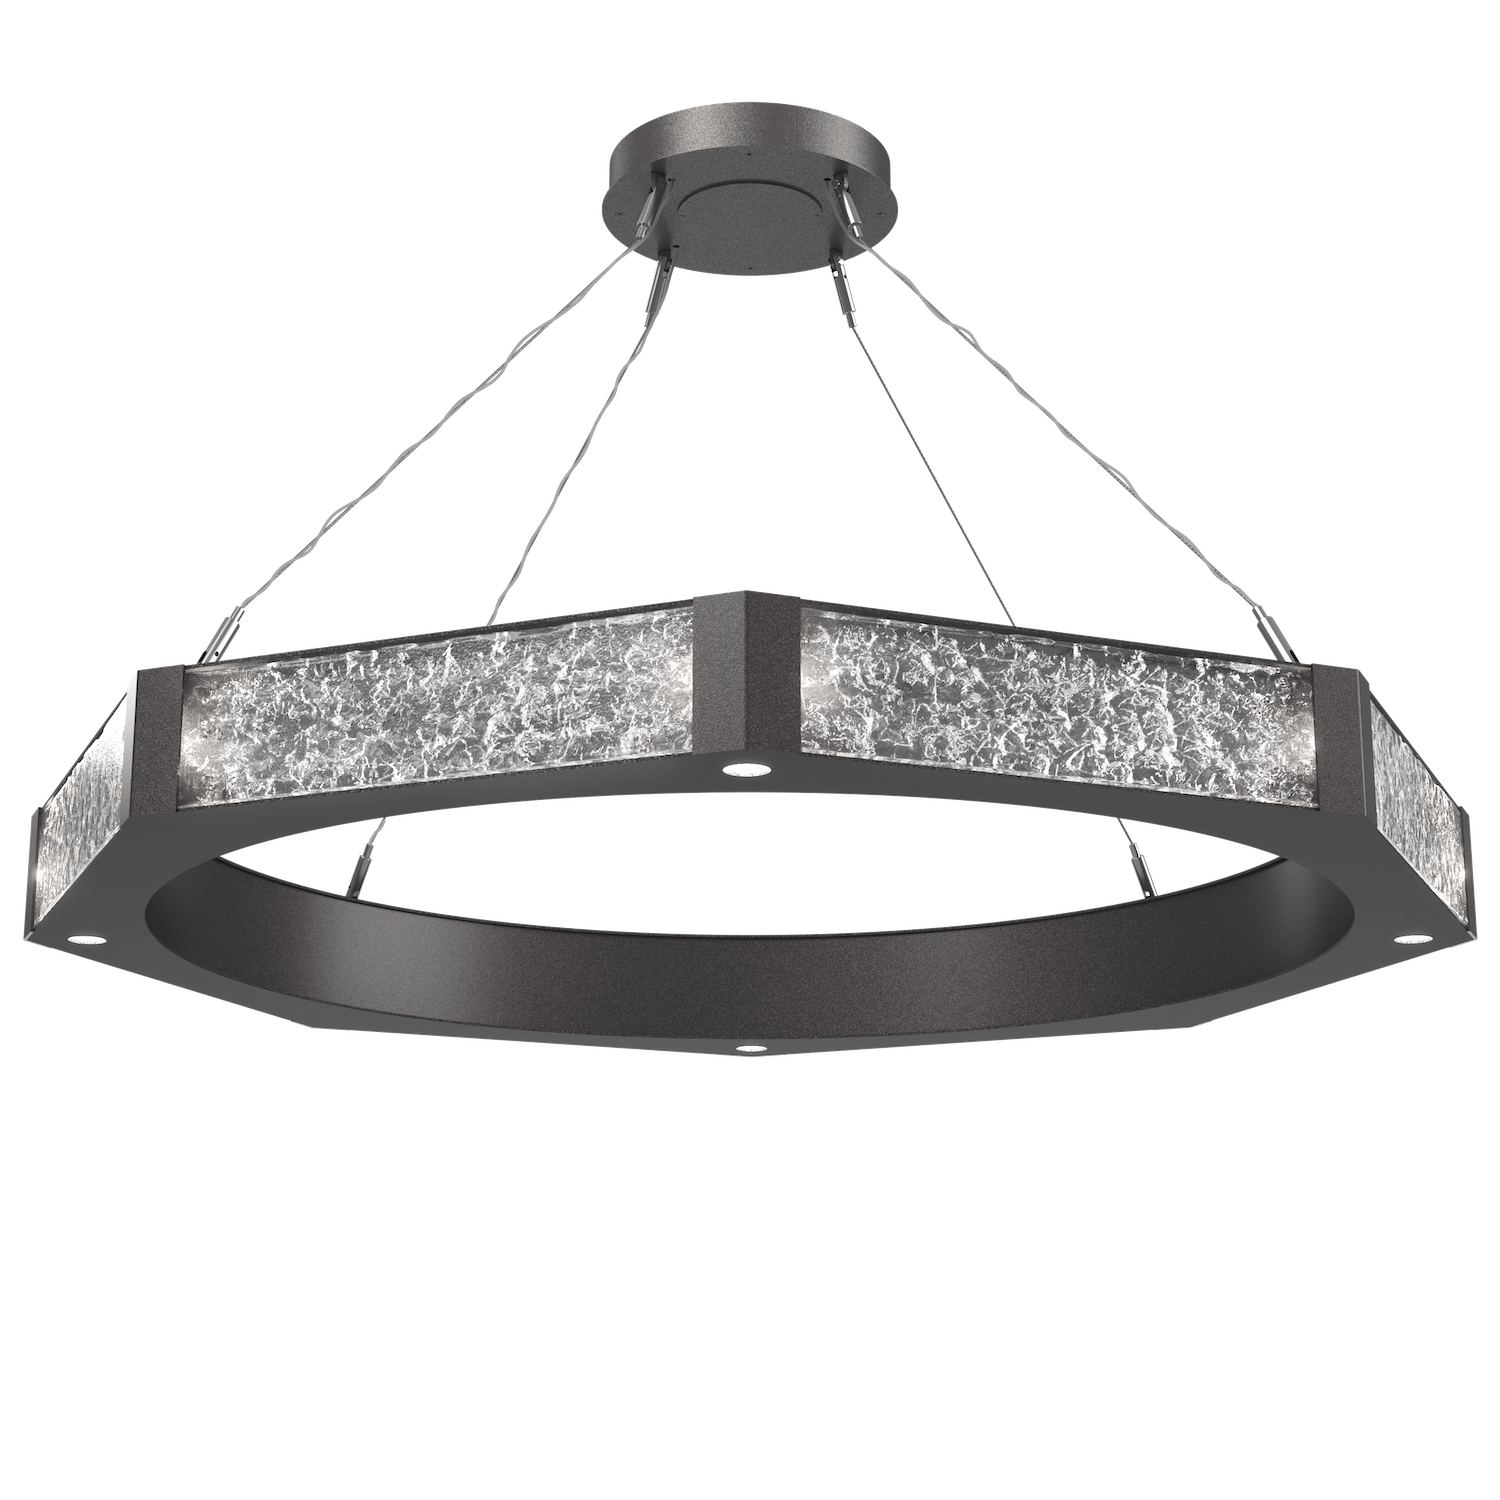 CHB0061-48-GP-GC-Hammerton-Studio-Glacier-48-inch-ring-chandelier-with-graphite-finish-and-clear-blown-glass-with-geo-clear-cast-glass-diffusers-and-LED-lamping